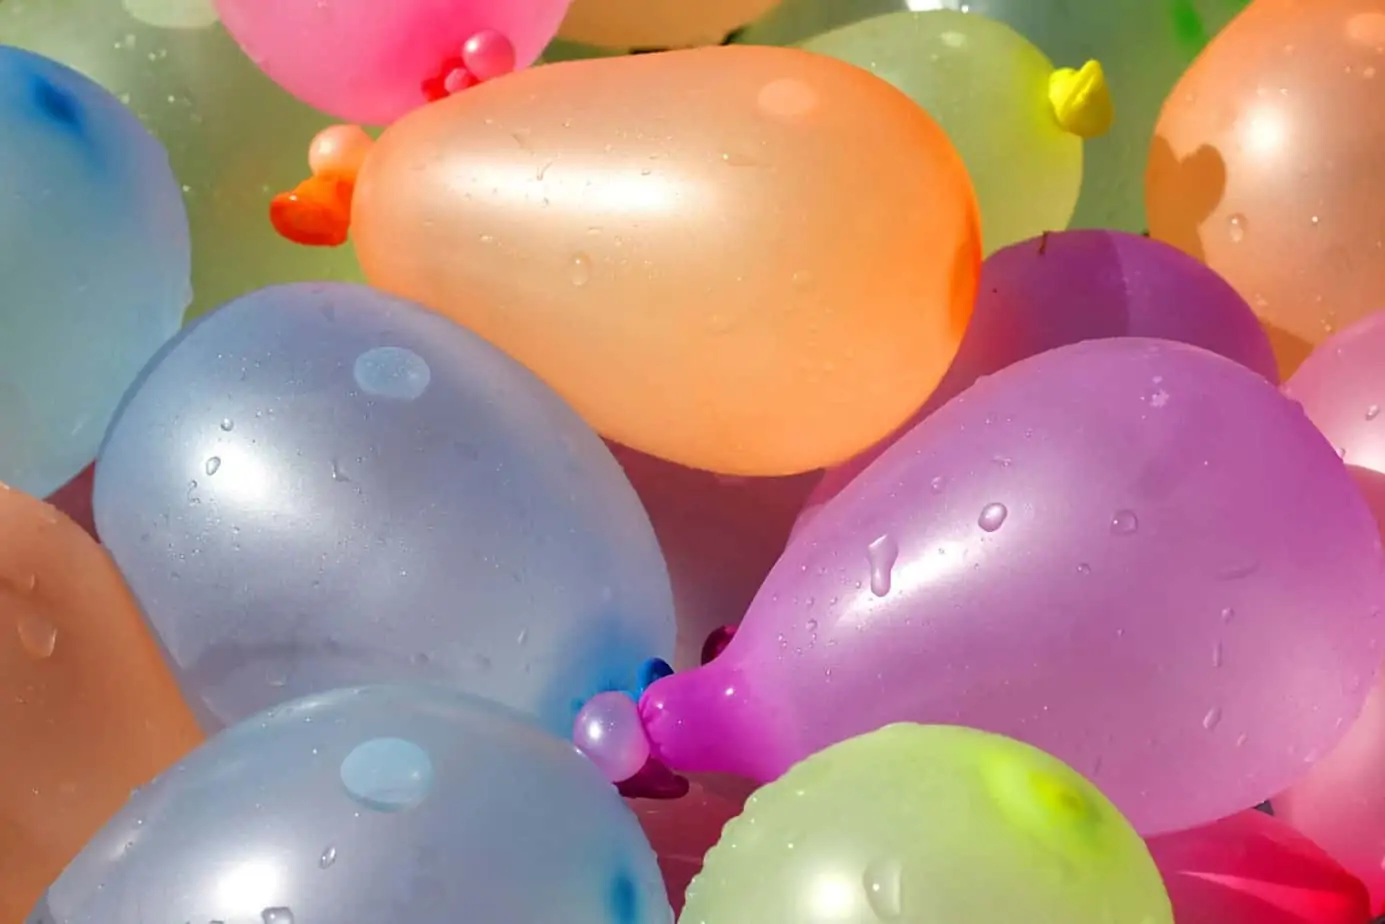 water balloons are a fun outdoor activity for kids